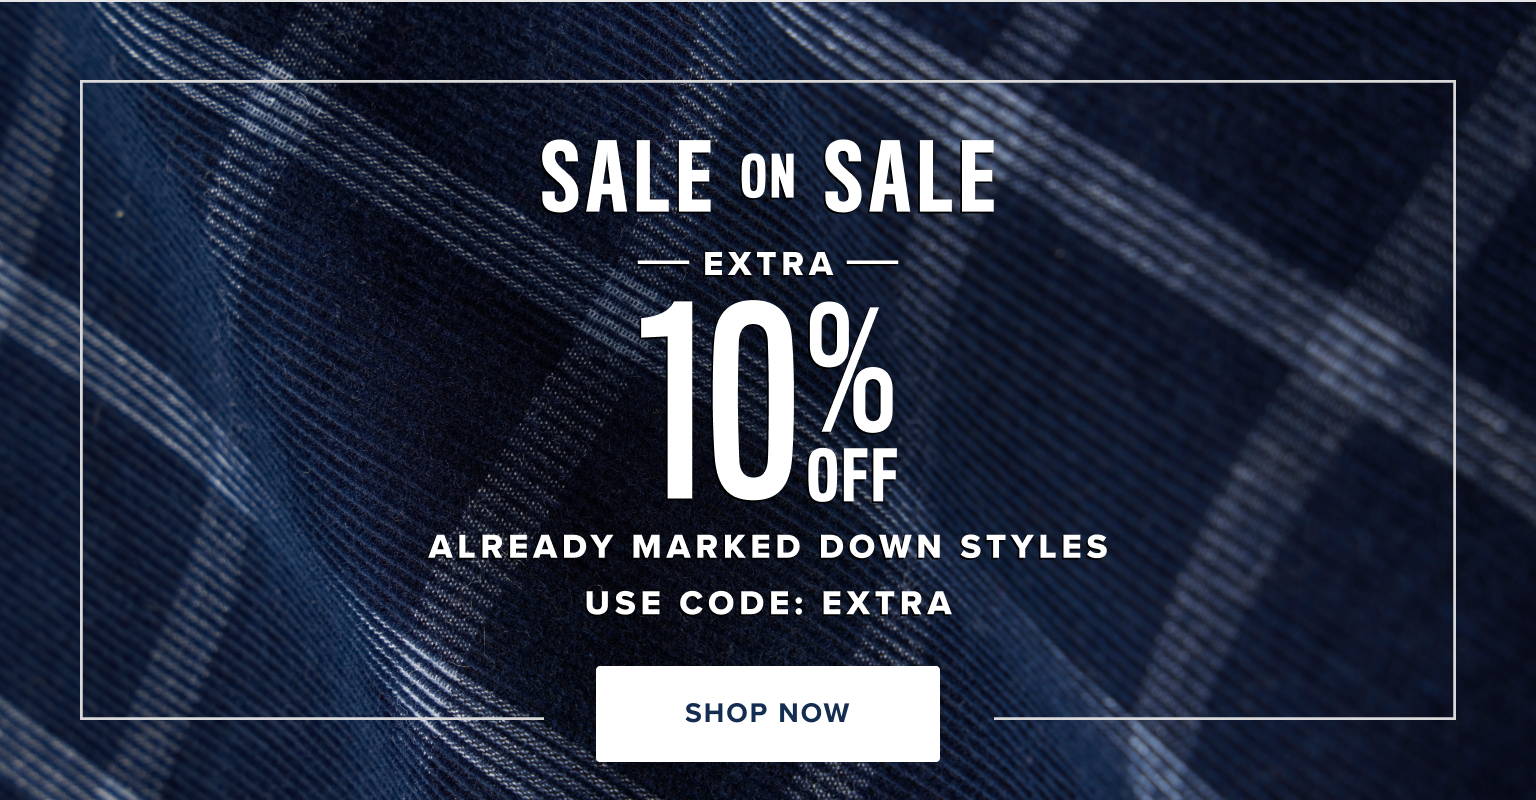 Sale on sale! Extra 10% Off already marked down styles. 